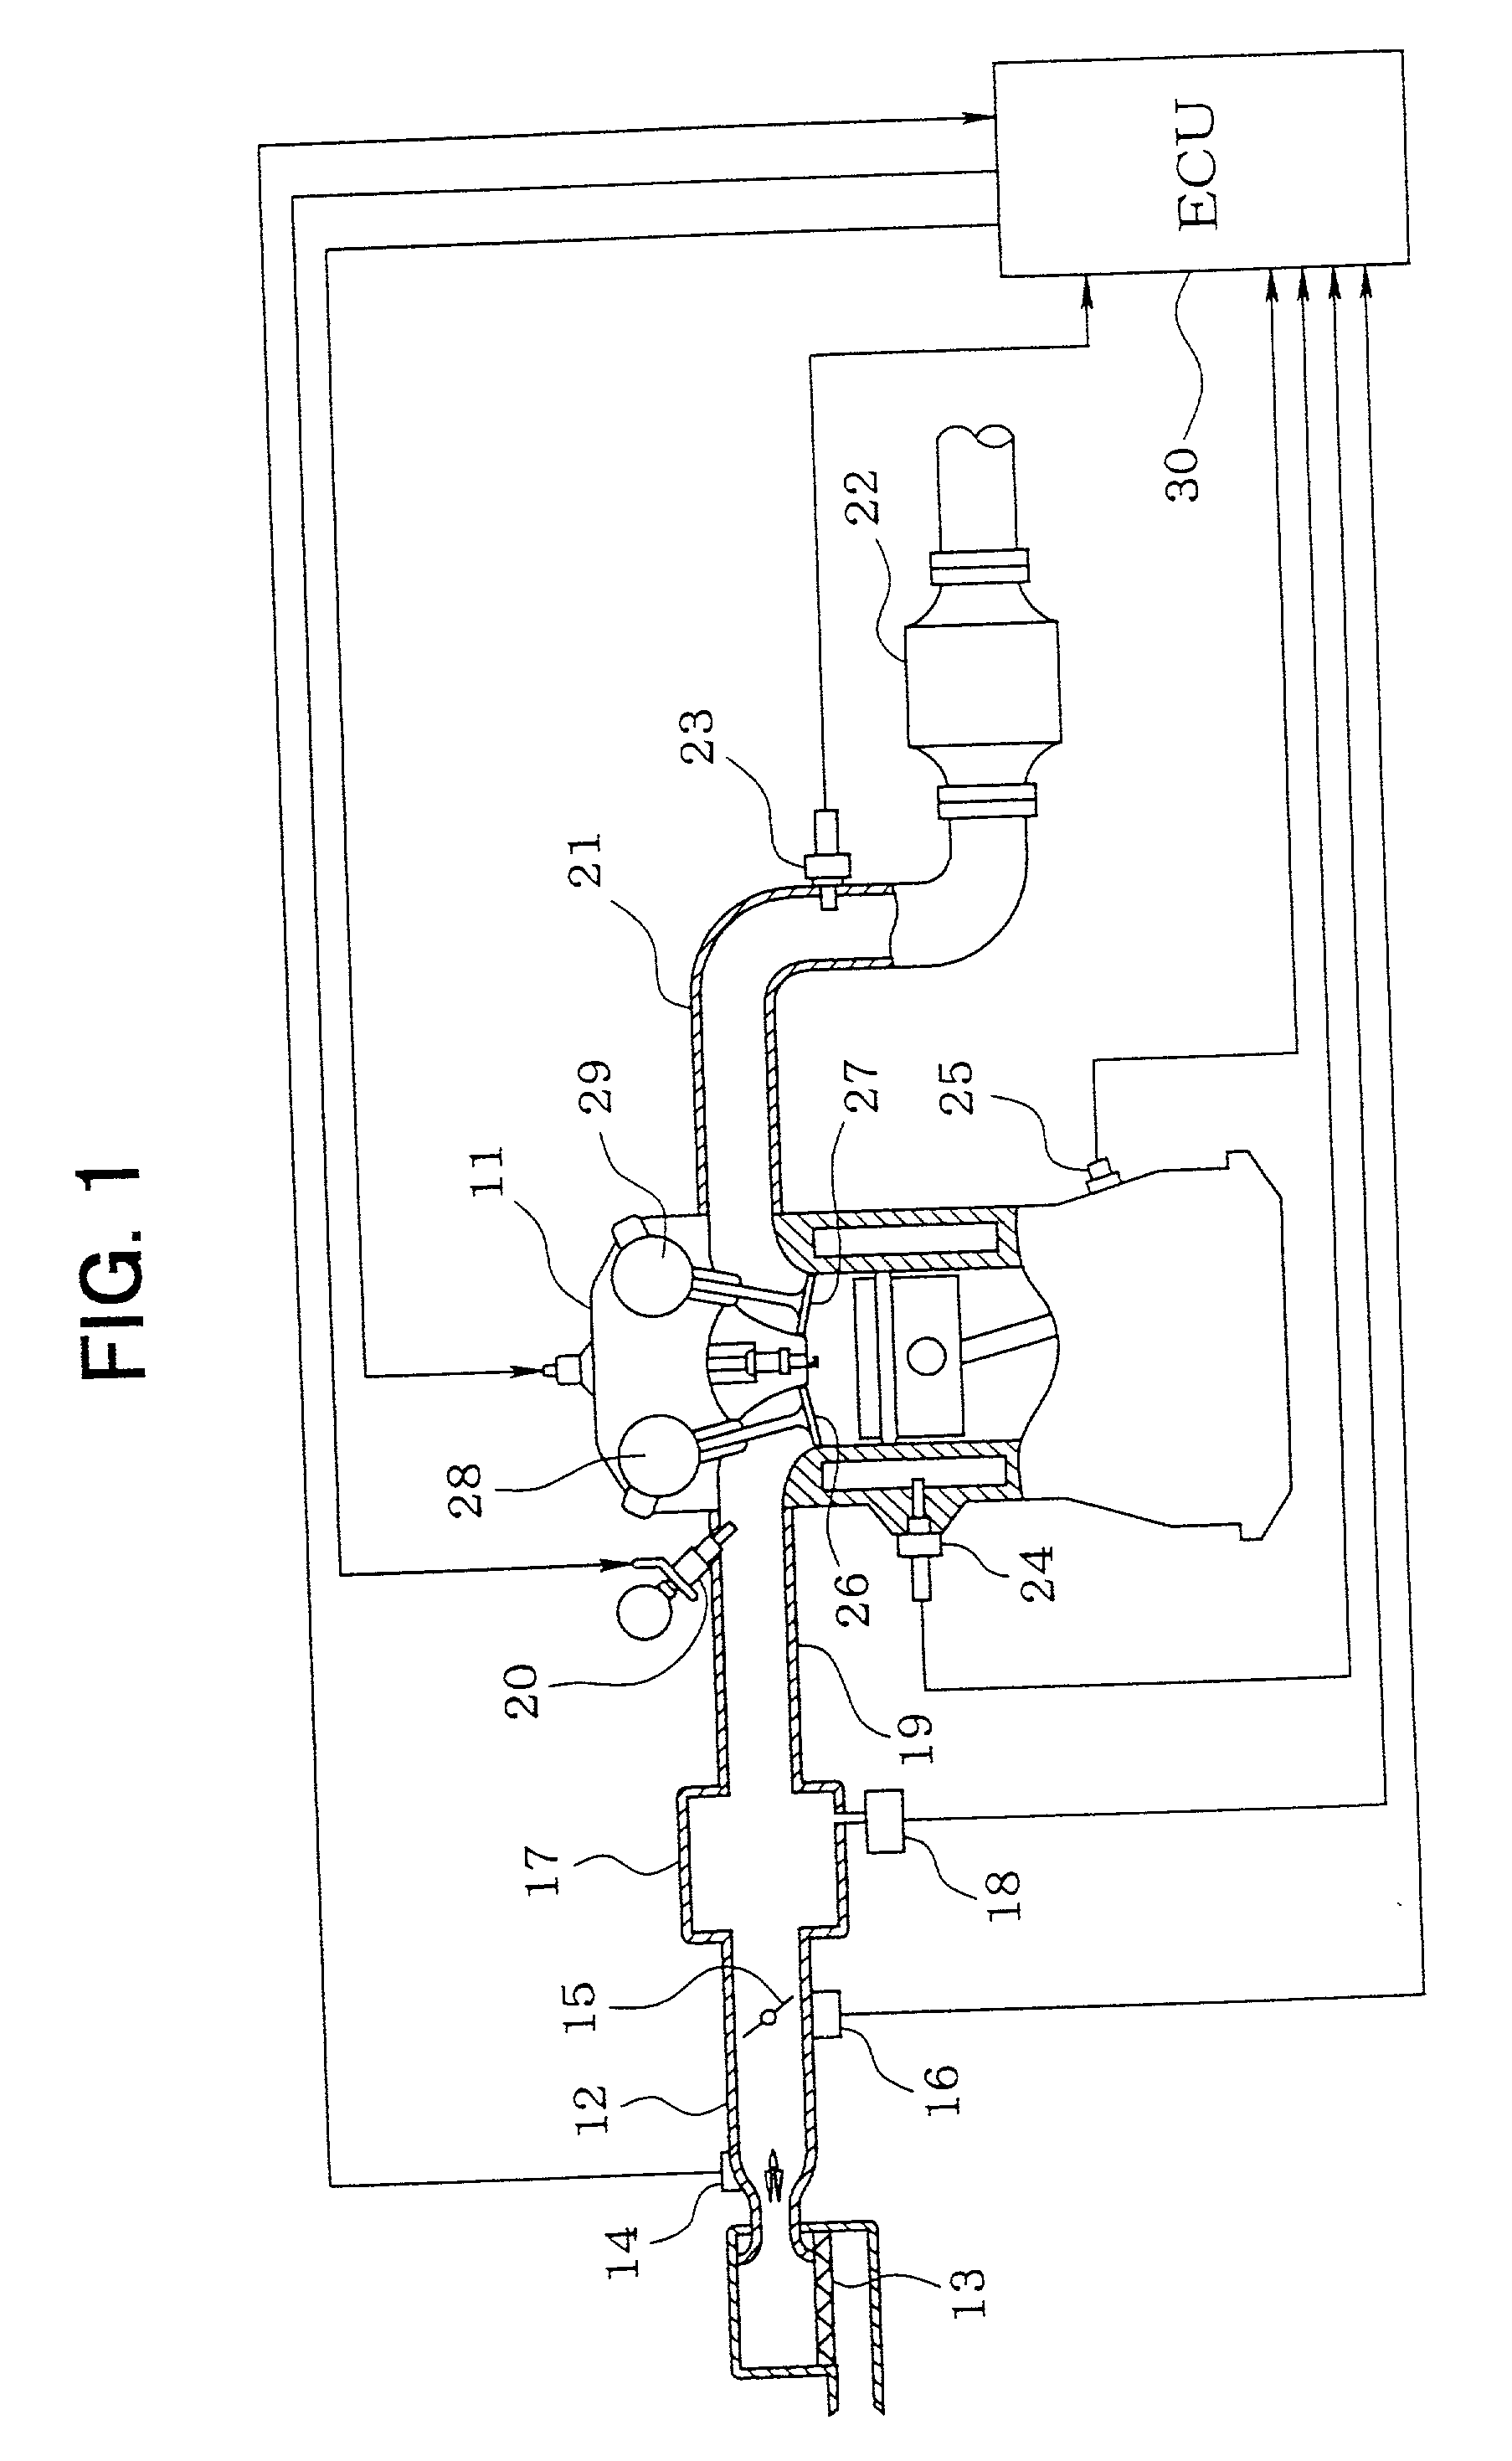 Air amount detector for internal combustion engine